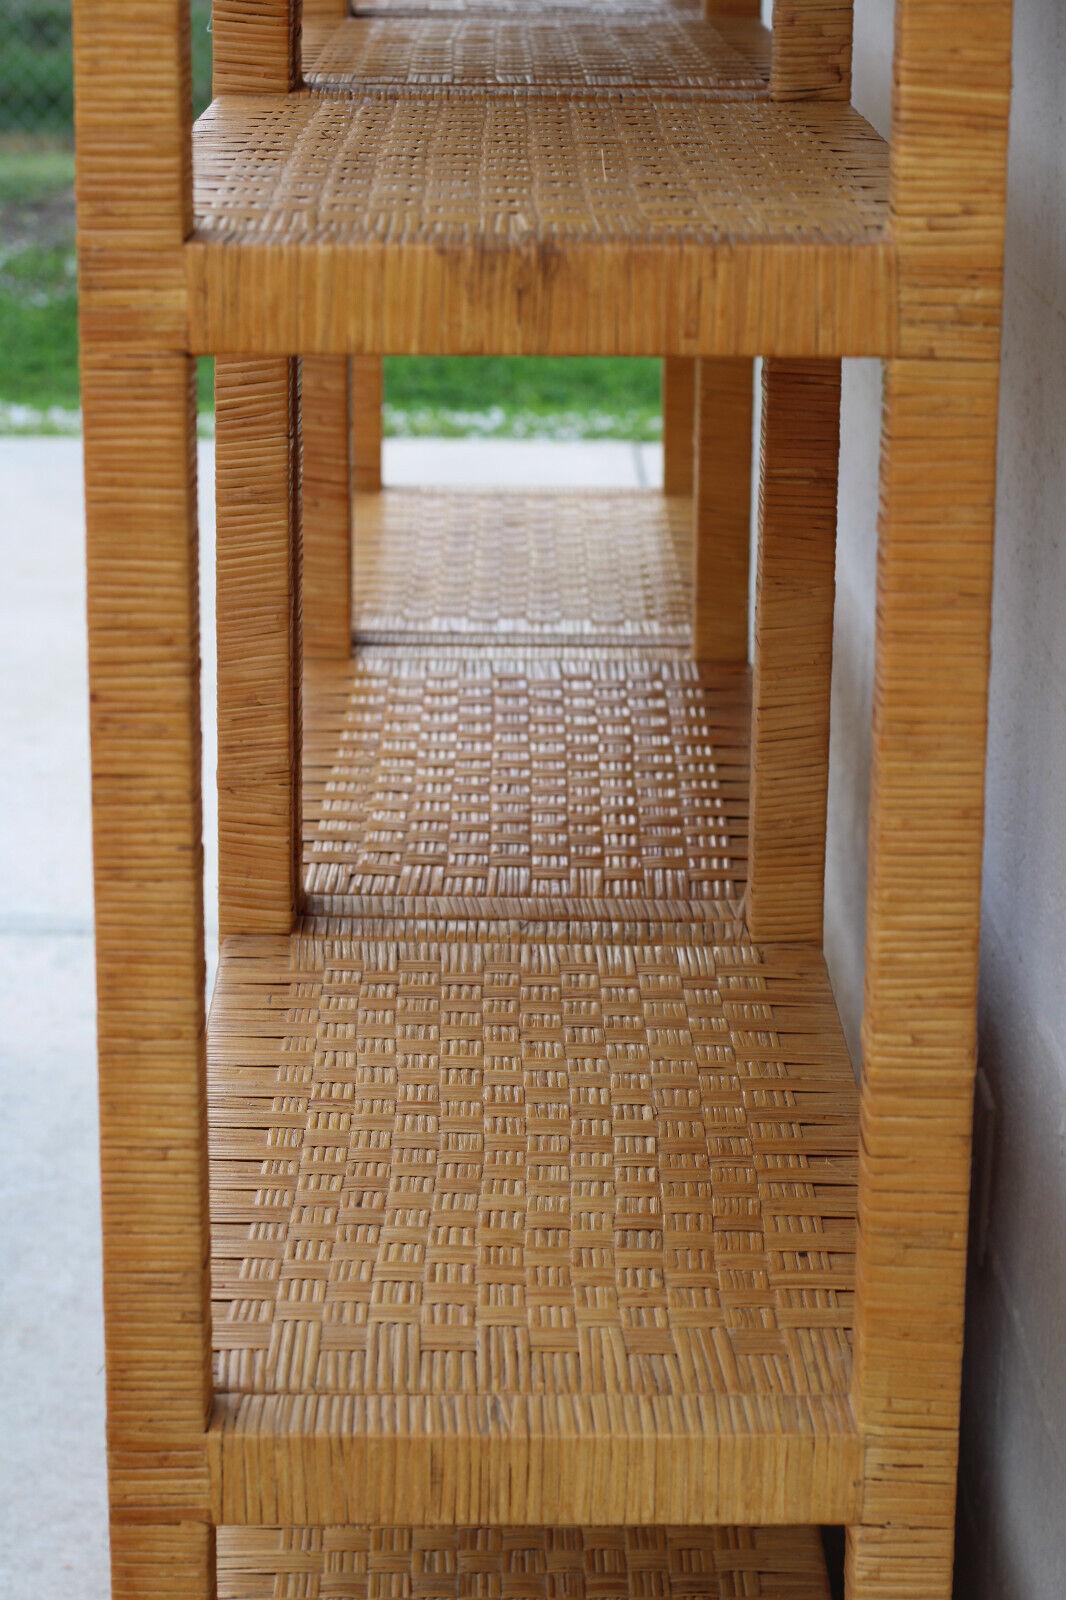 Vintage 3-Piece Wrapped and Woven Rattan Etagere Wall Unit In Good Condition For Sale In Vero Beach, FL